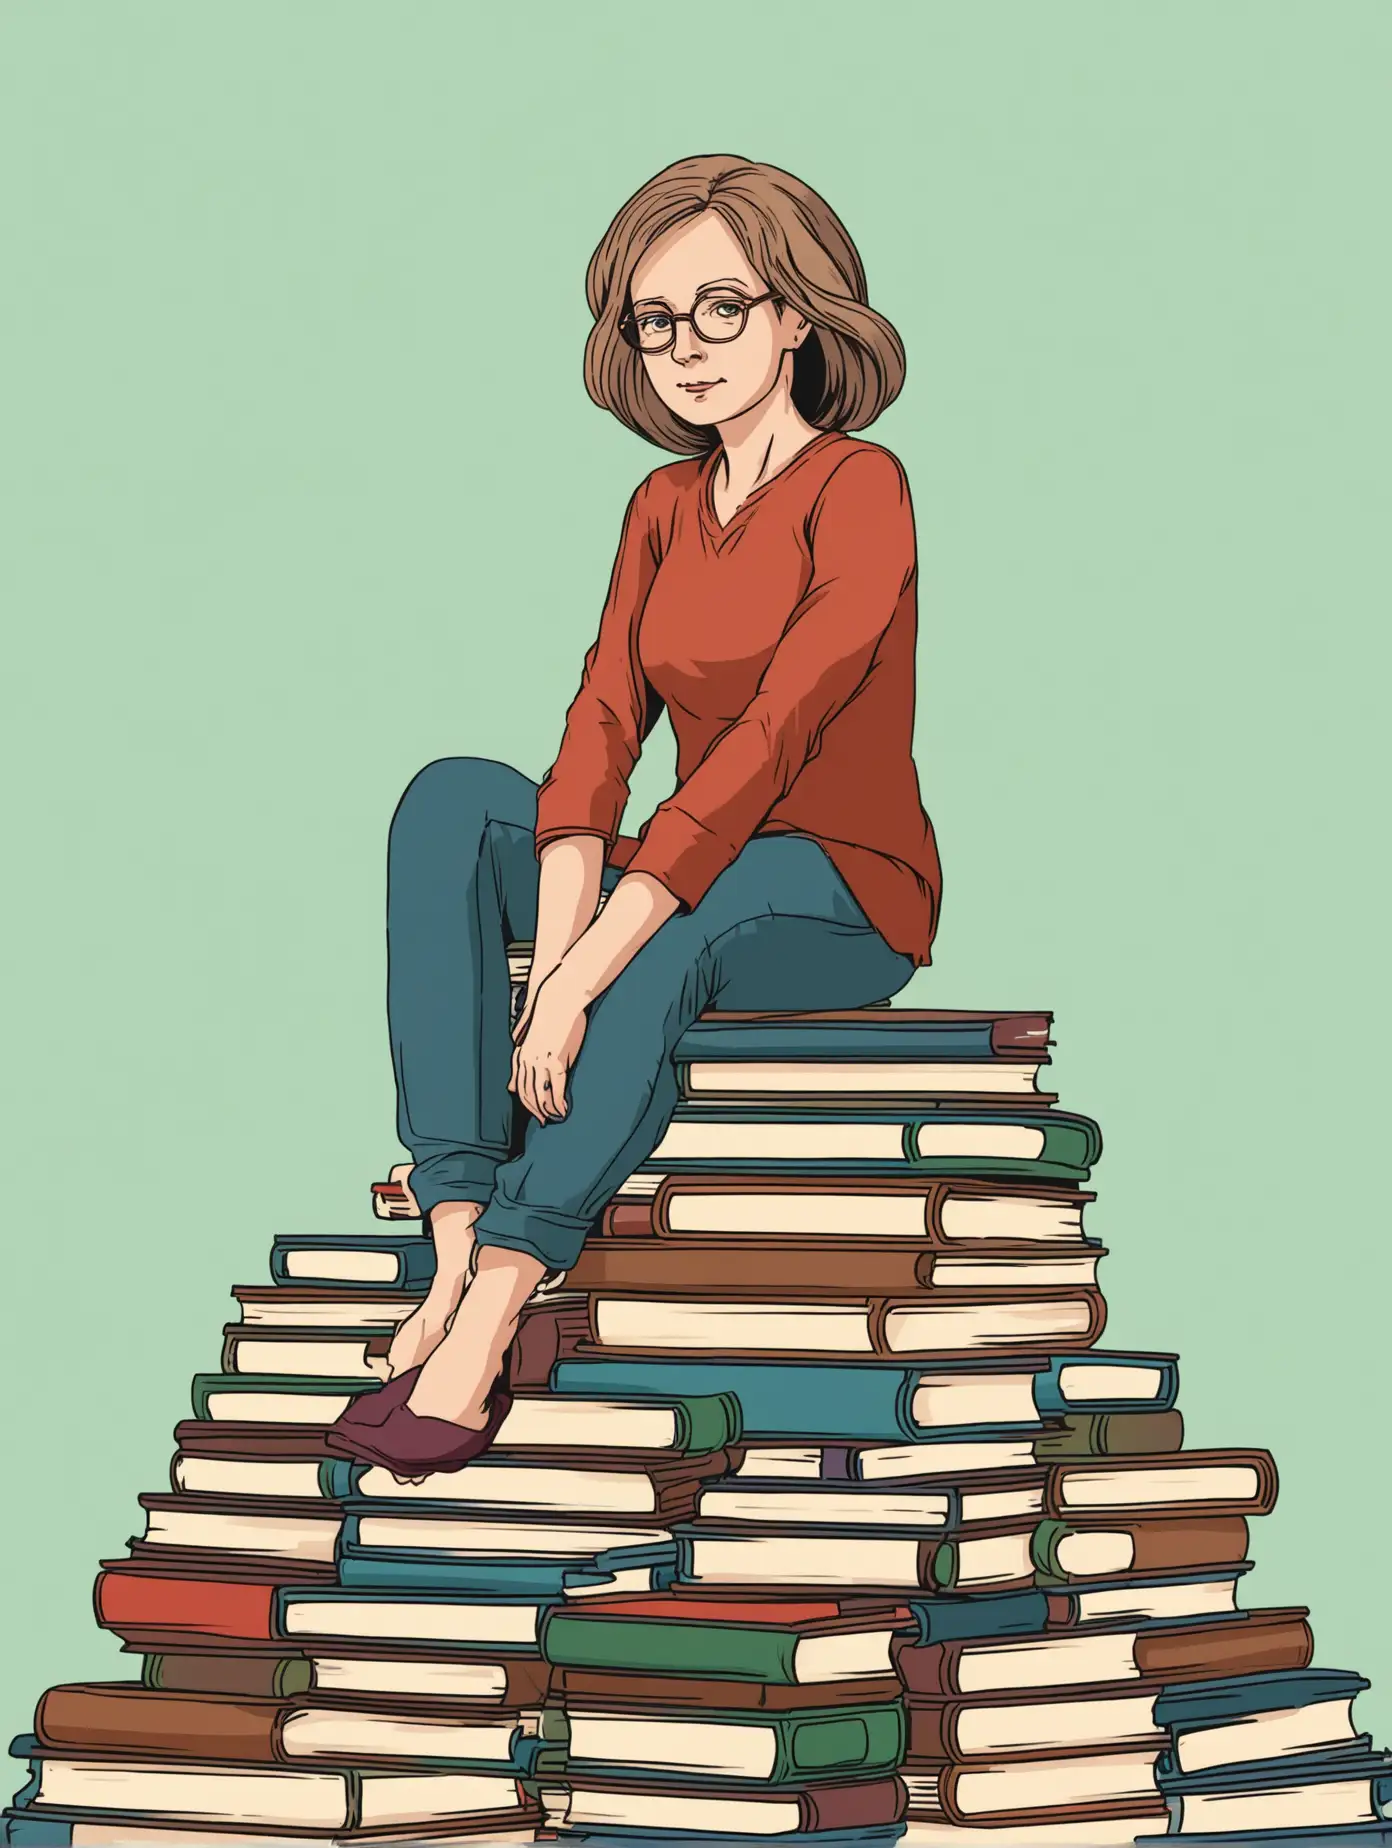 MiddleAged Woman Sitting on a Stack of Books